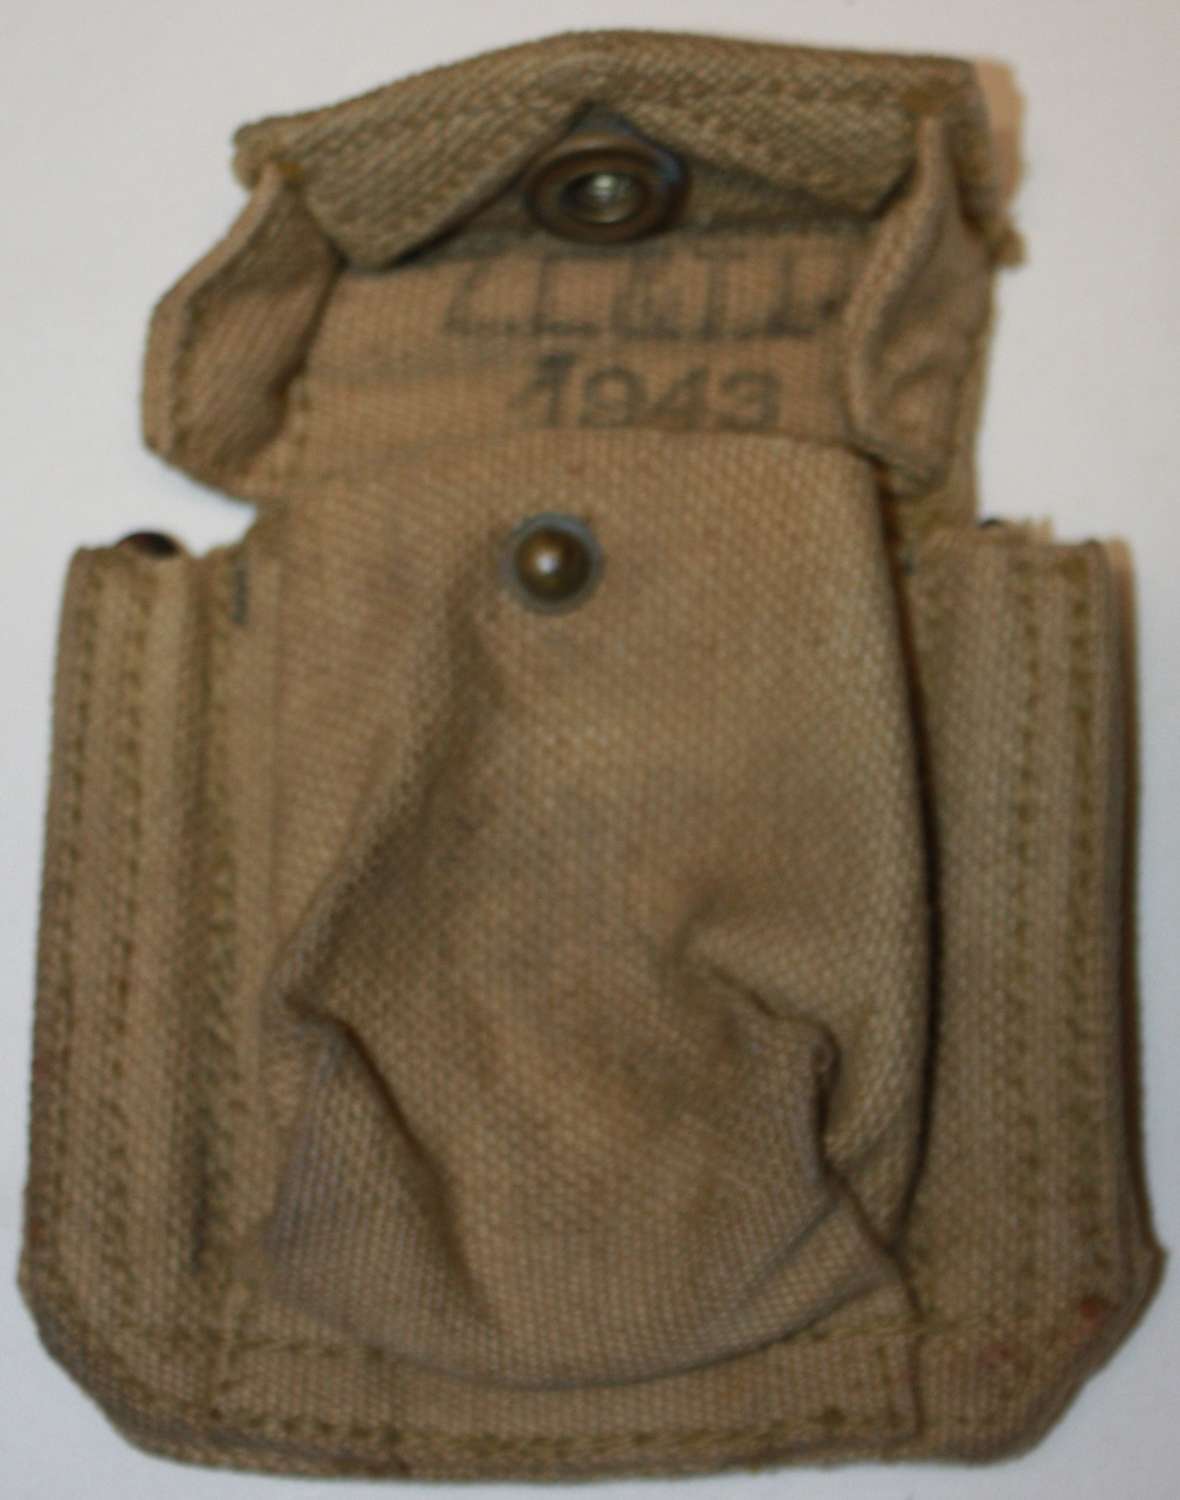 A 1943 DATED CANADIAN 37 PATTERN PISTOL AMMO POUCH